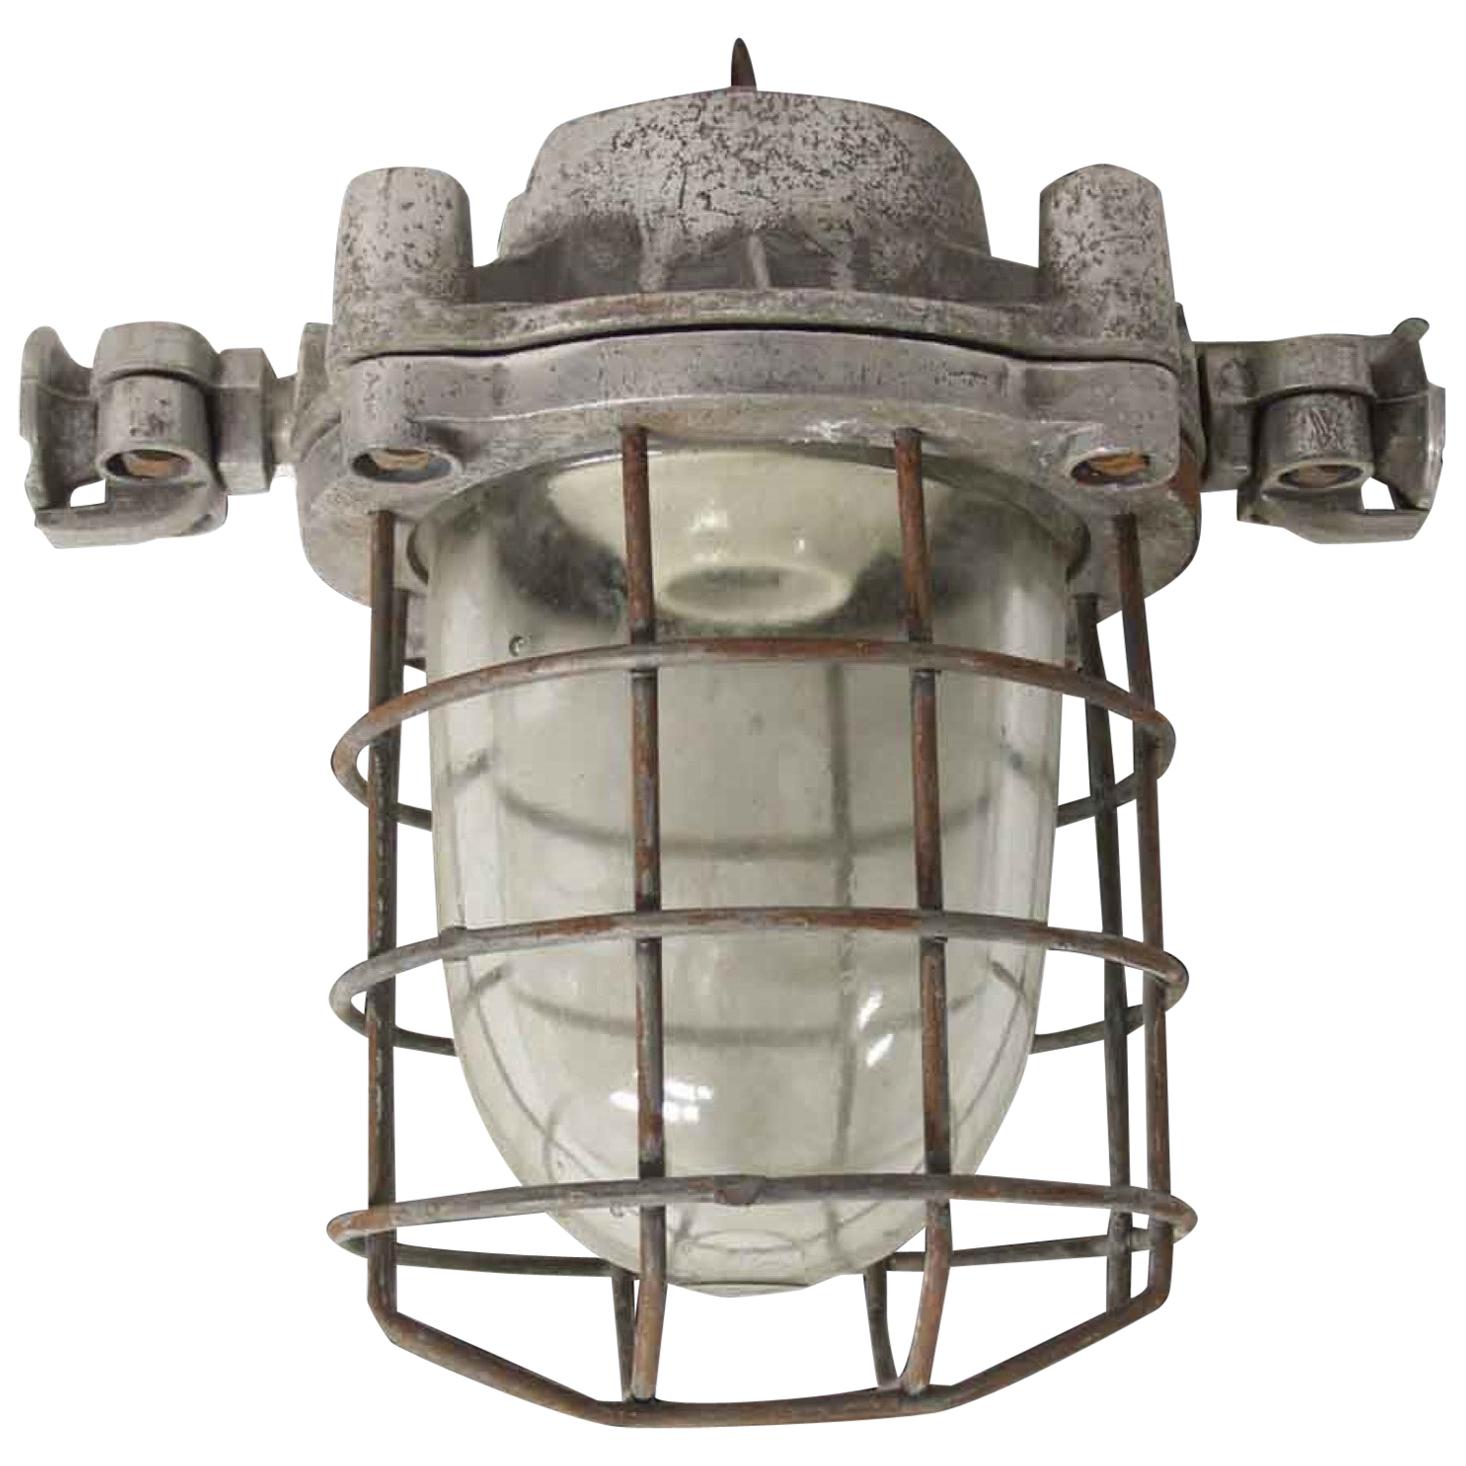 1940s Industrial Nautical Ship Sconce or Ceiling Light with Cage